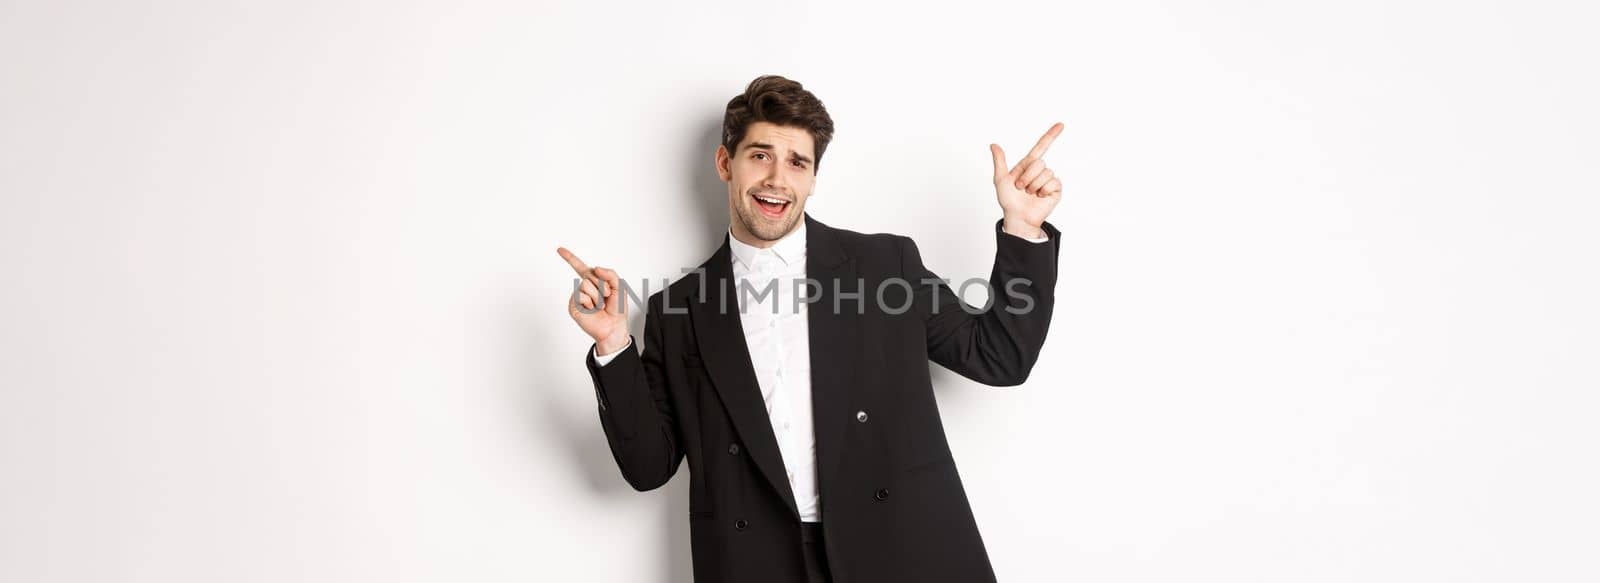 Handsome guy dancing and partying in black suit, pointing fingers sideways, showing two promo banners, standing against white background.